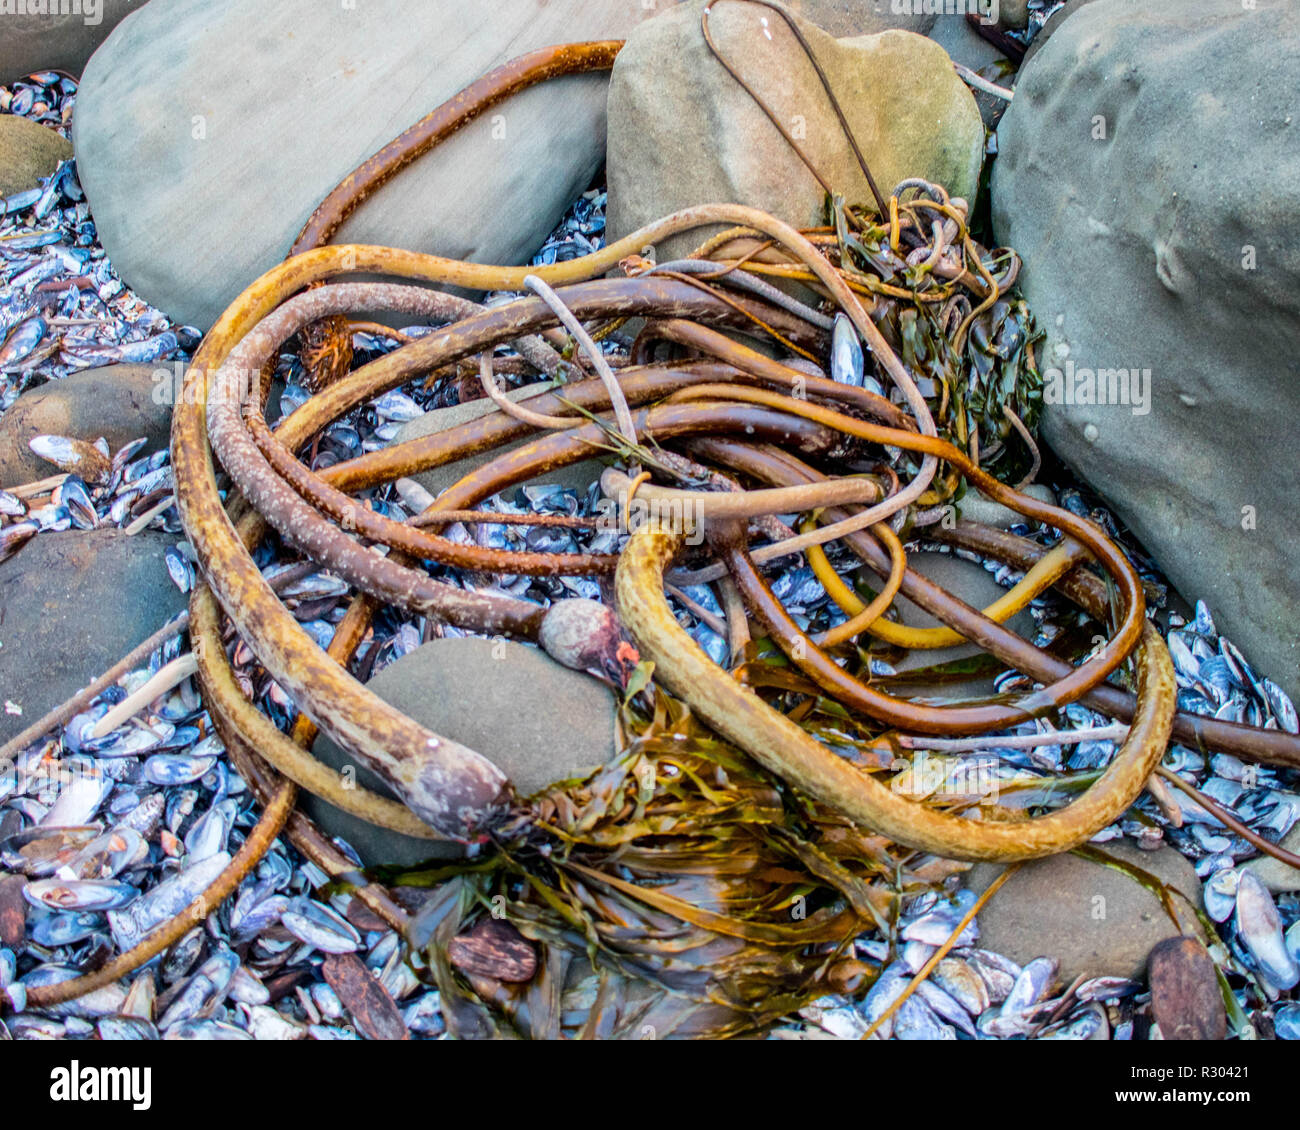 A pile of bull kelp is washed ashore during high tide in a rocky inlet near Coos Bay, Oregon. Stock Photo